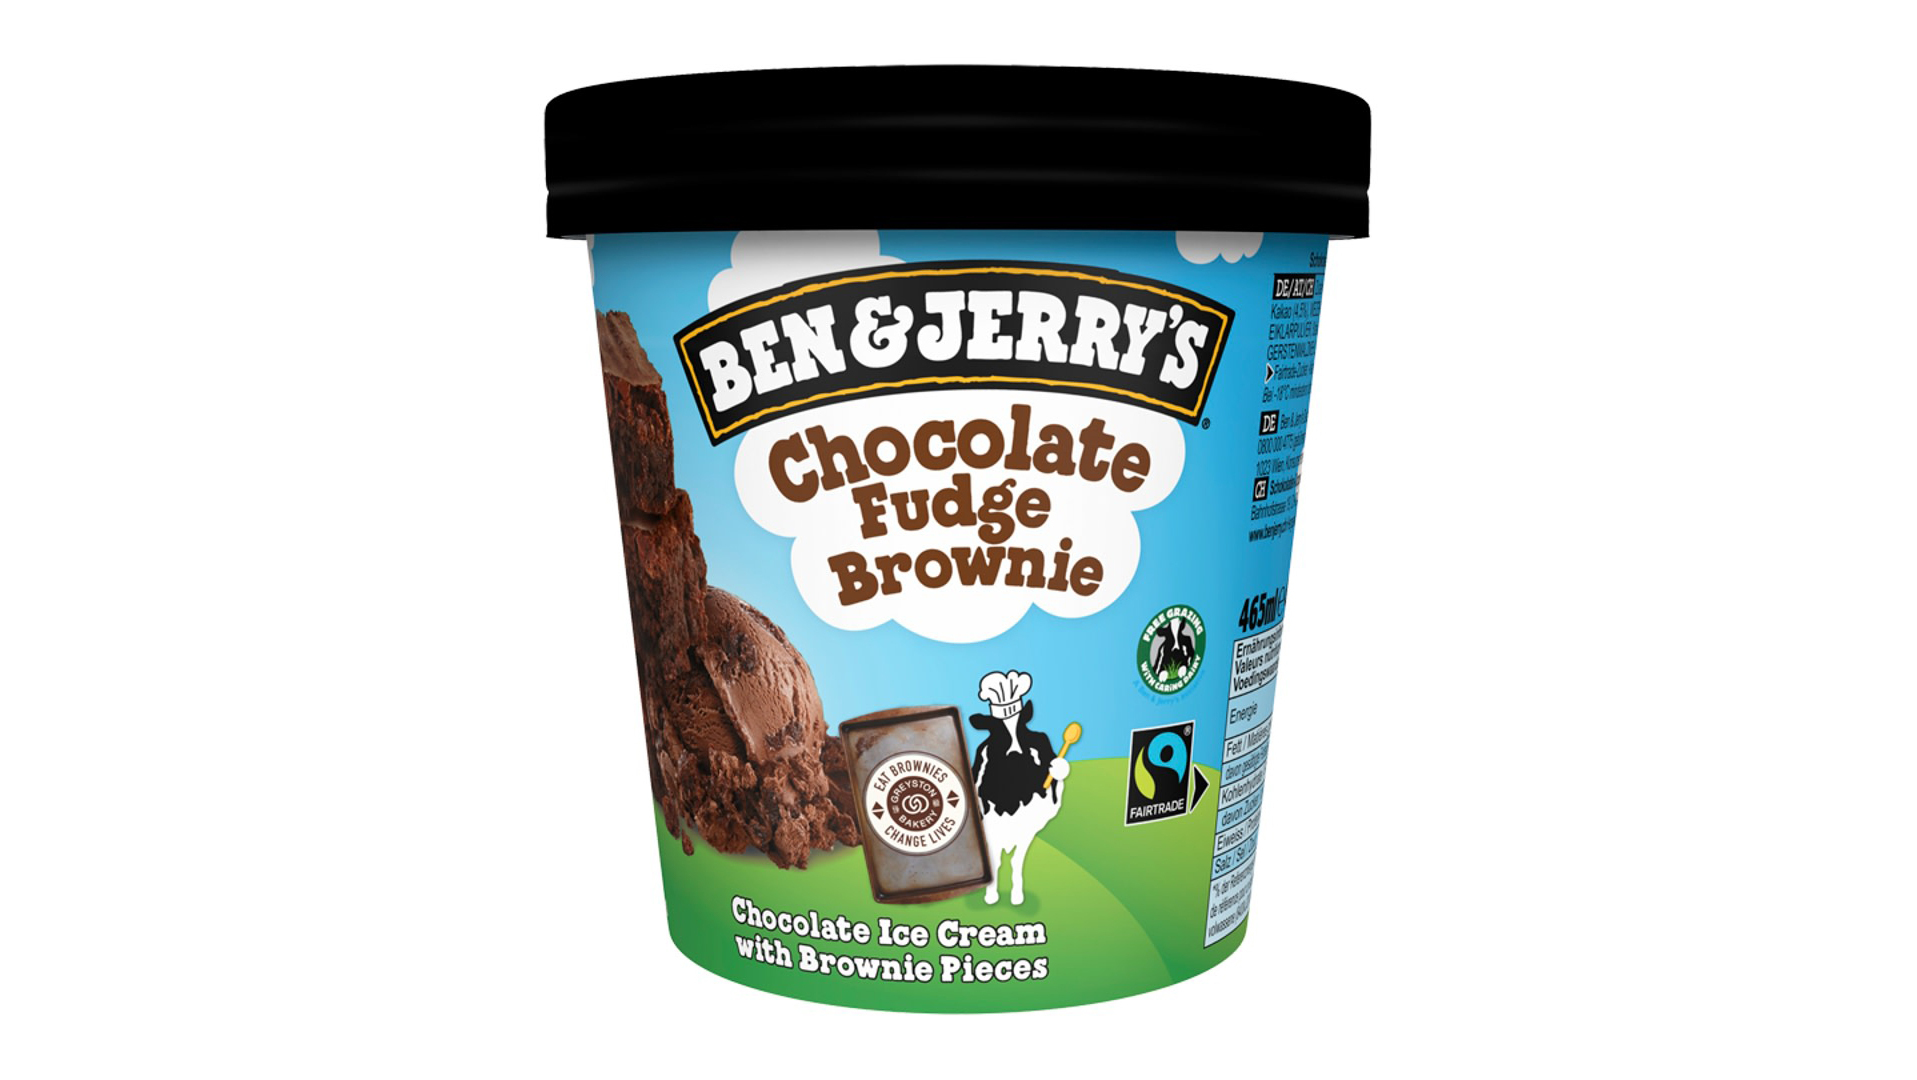 Ben & Jerry's Chocolate Fudge Brownie 500ml - Wraps Delivery in Stratford New Town E15